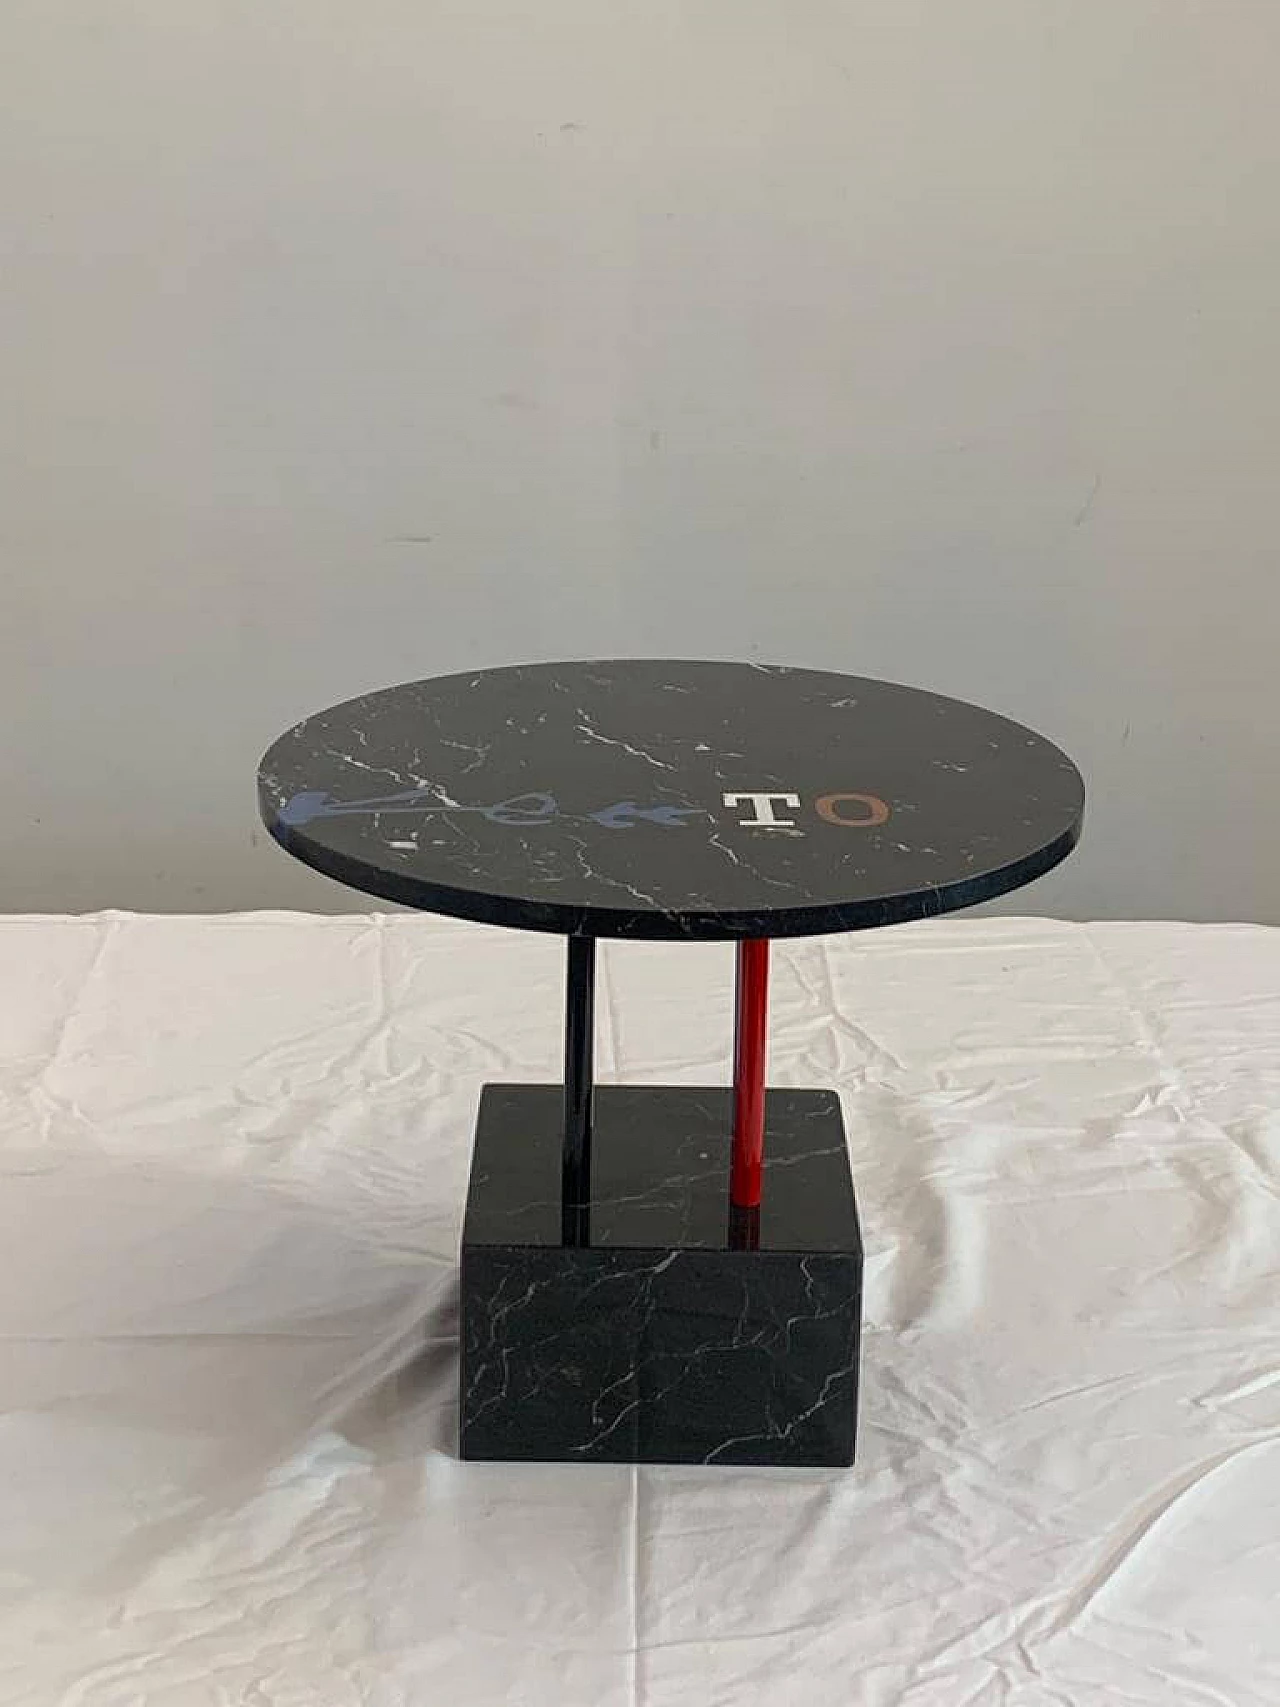 Kleeto coffee table by Cleto Munari, unique piece with inlaid marble 1312100